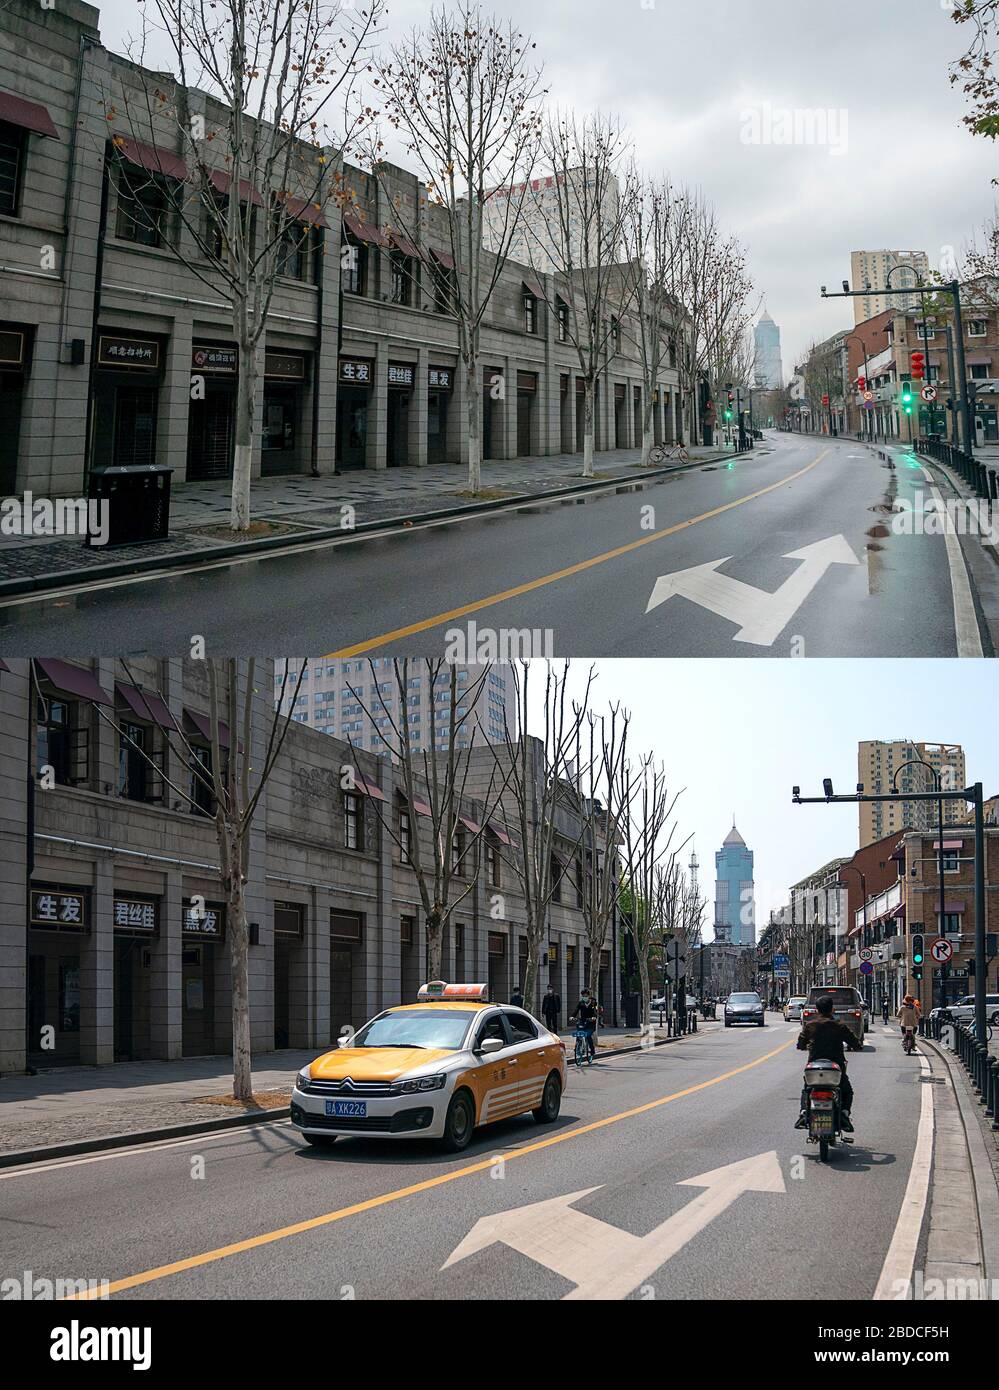 (200408) -- WUHAN, April 8, 2020 (Xinhua) -- Combo photo shows the Zhongshan Avenue in Wuhan, central China's Hubei Province on Jan. 26, 2020 (upper) and on April 8, 2020.  With long lines of cars streaming through expressway tollgates and masked passengers boarding trains, the megacity of Wuhan in central China lifted outbound travel restrictions on Wednesday after almost 11 weeks of lockdown imposed to stem the COVID-19 outbreak (Xinhua/Xiong Qi) Stock Photo